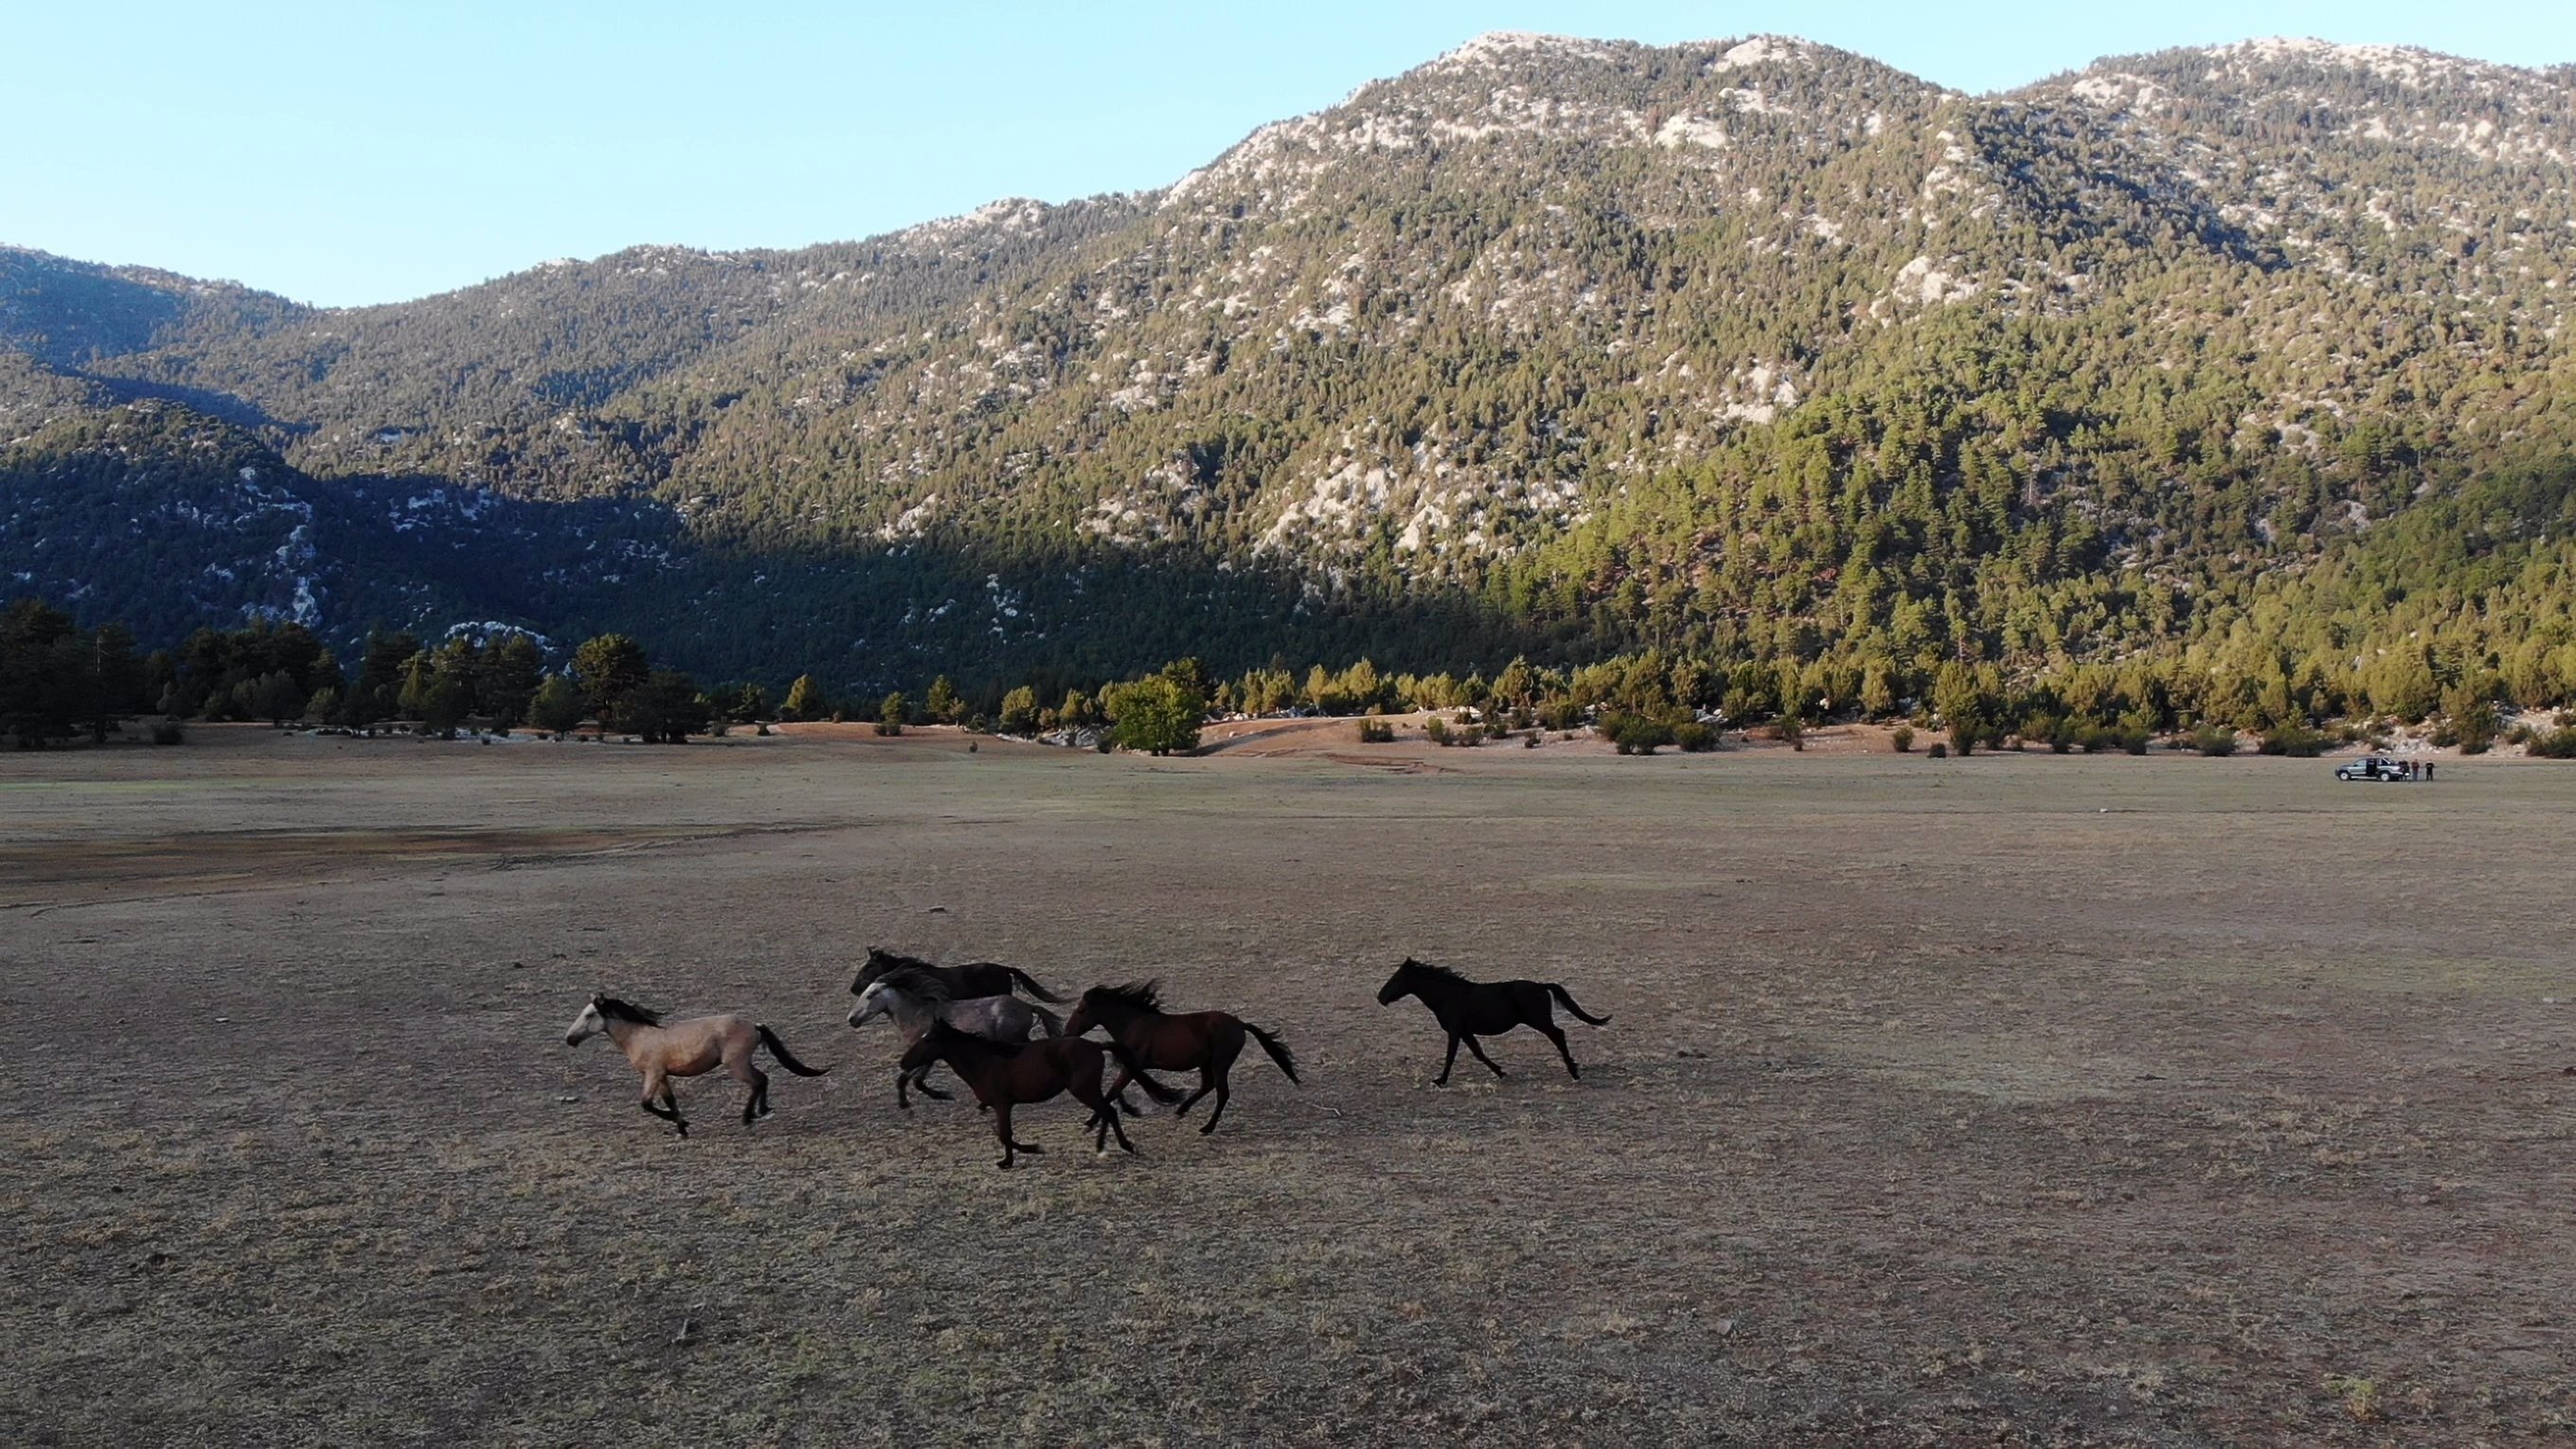 A view of wild horses in Ibradı district, in Antalya, southern Turkey, Sept. 22, 2021. (IHA Photo)